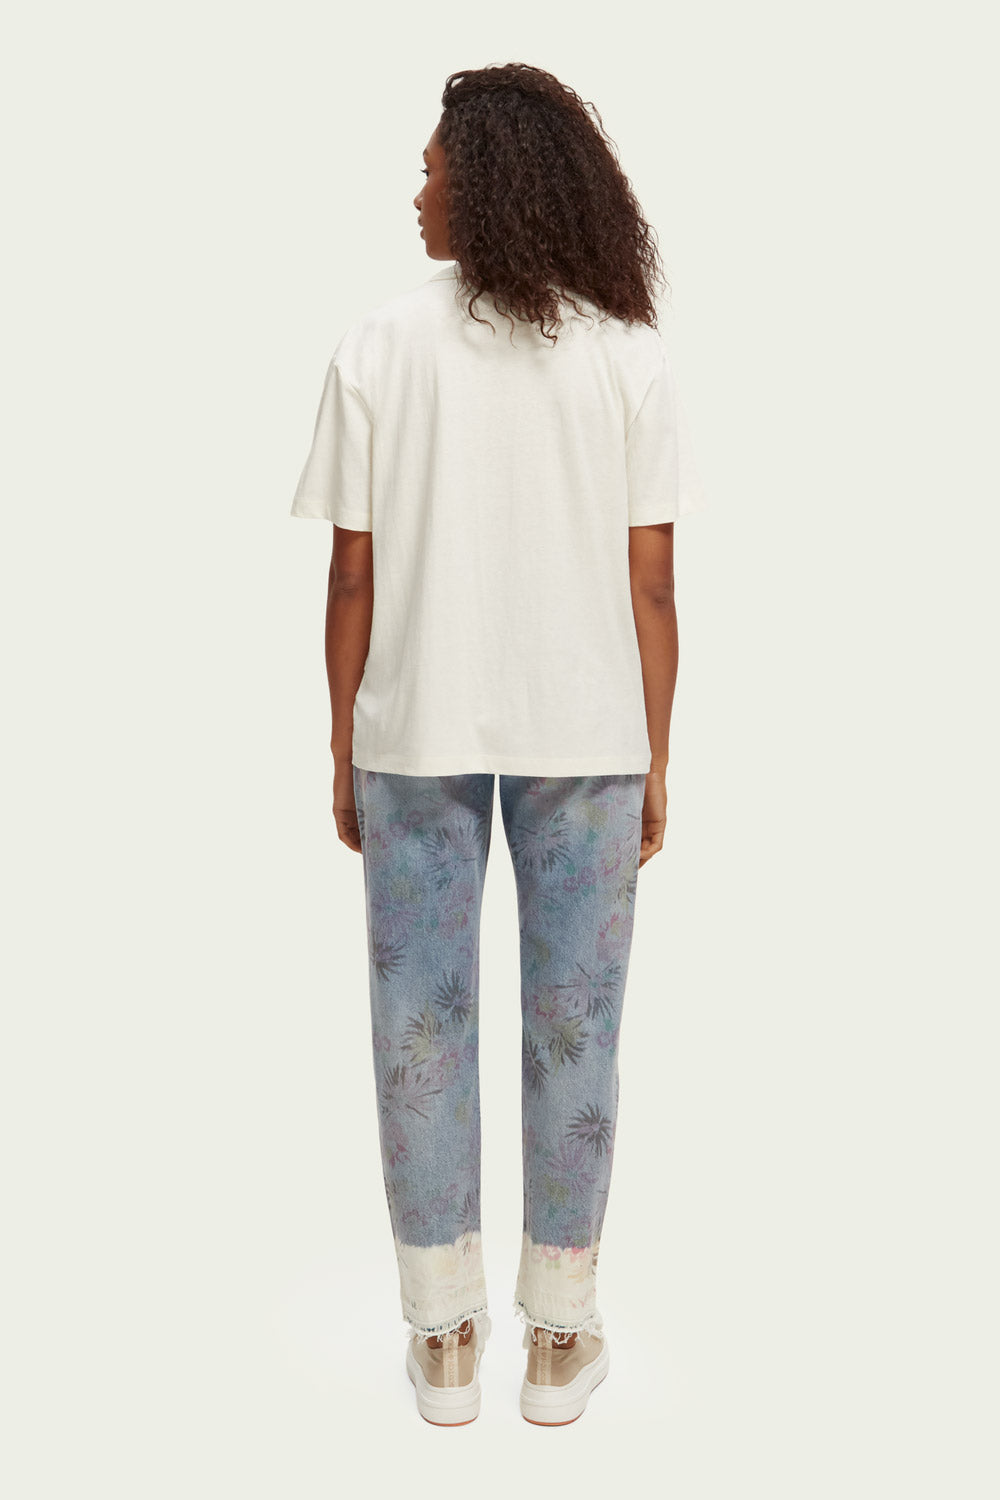 Scotch & Soda - Embroidered Loose Fit Tee - Vanilla White - Back